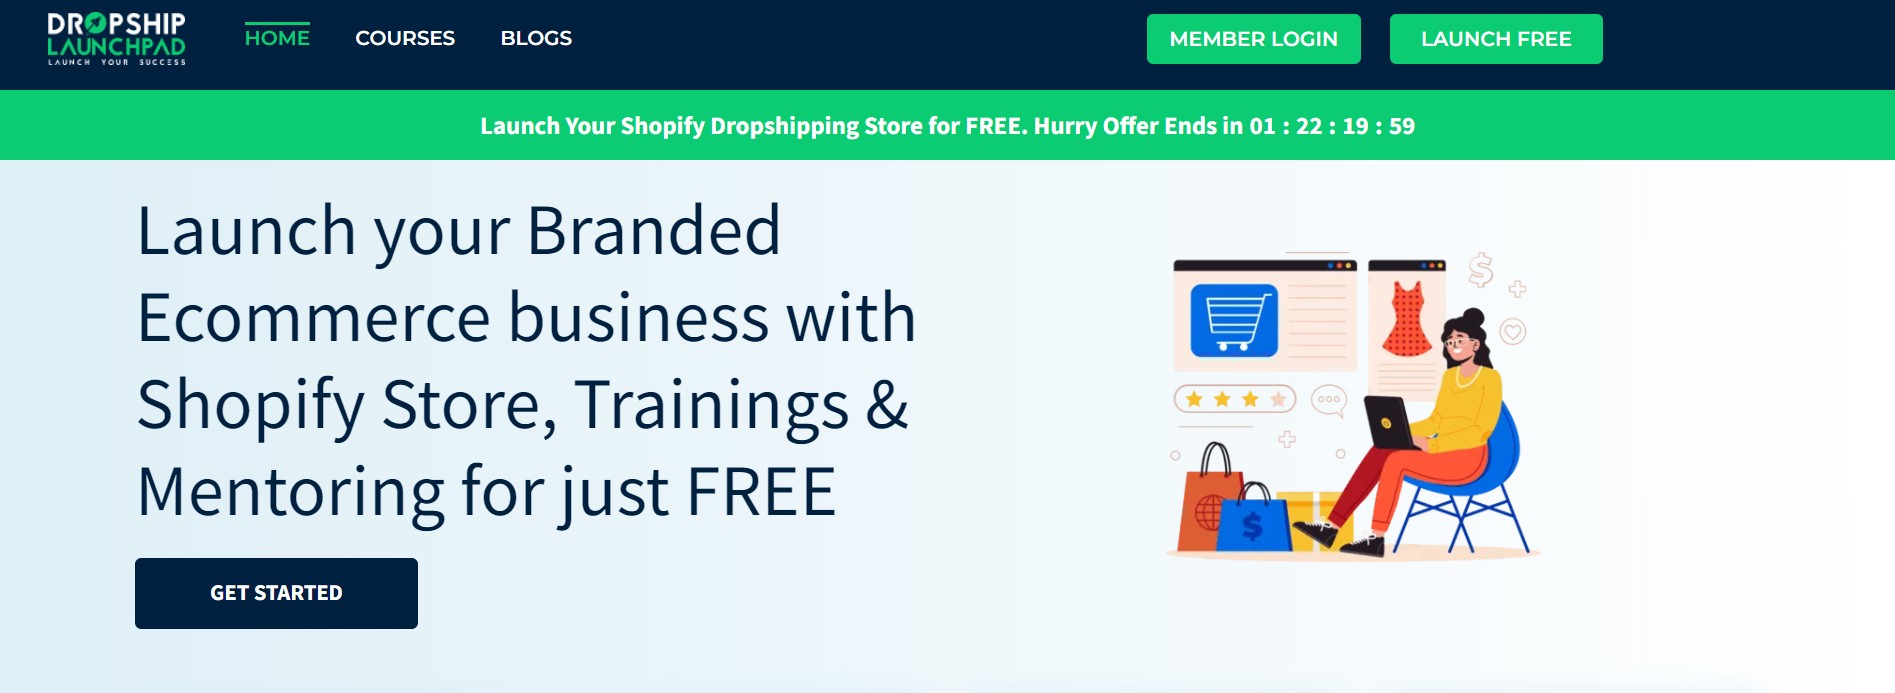 What are the benefits of selling high-margin dropshipping products with Dropship Launchpad?